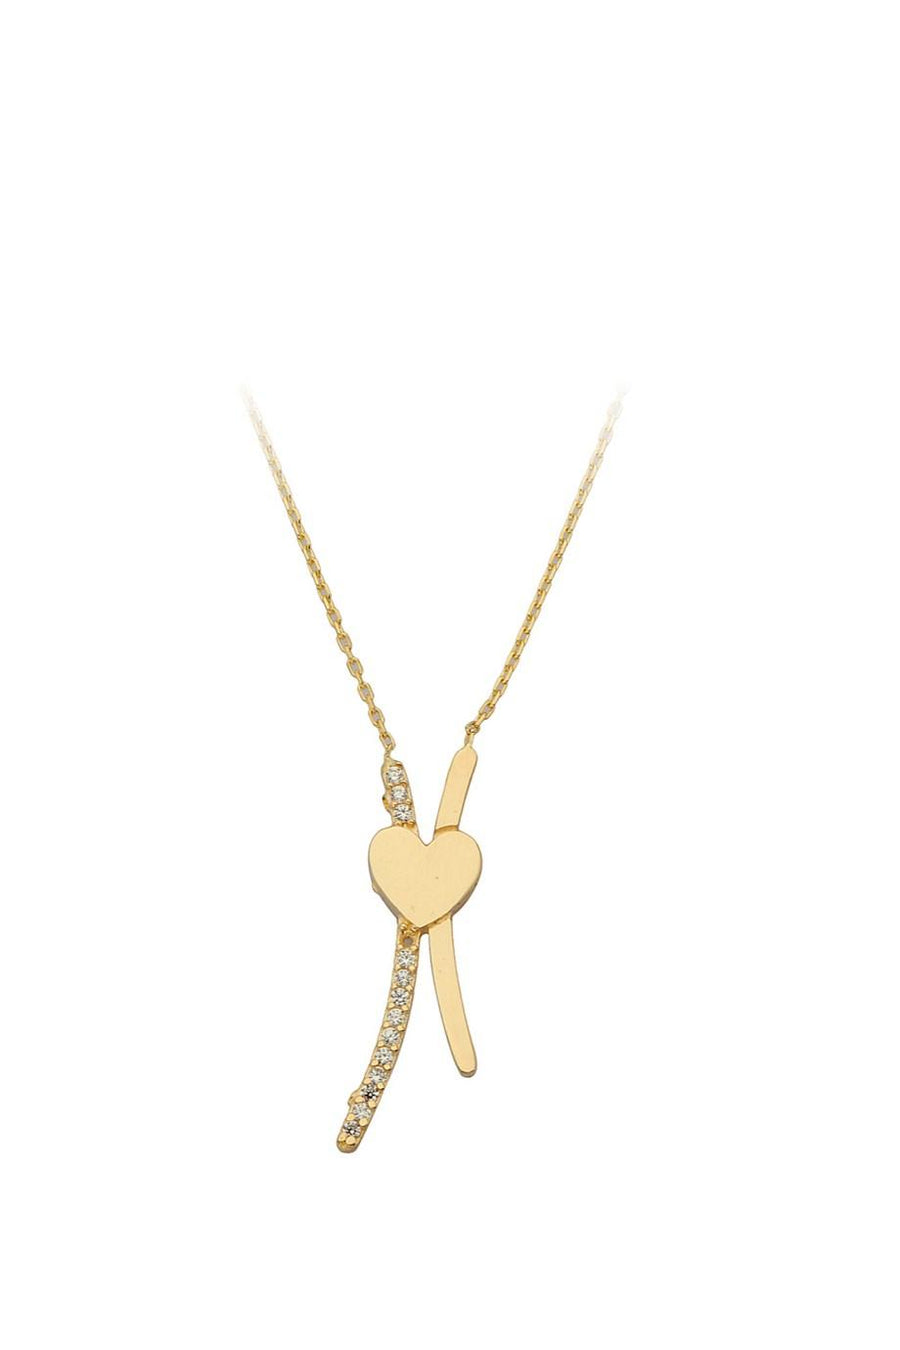 Stylish Necklace With Golden Heart